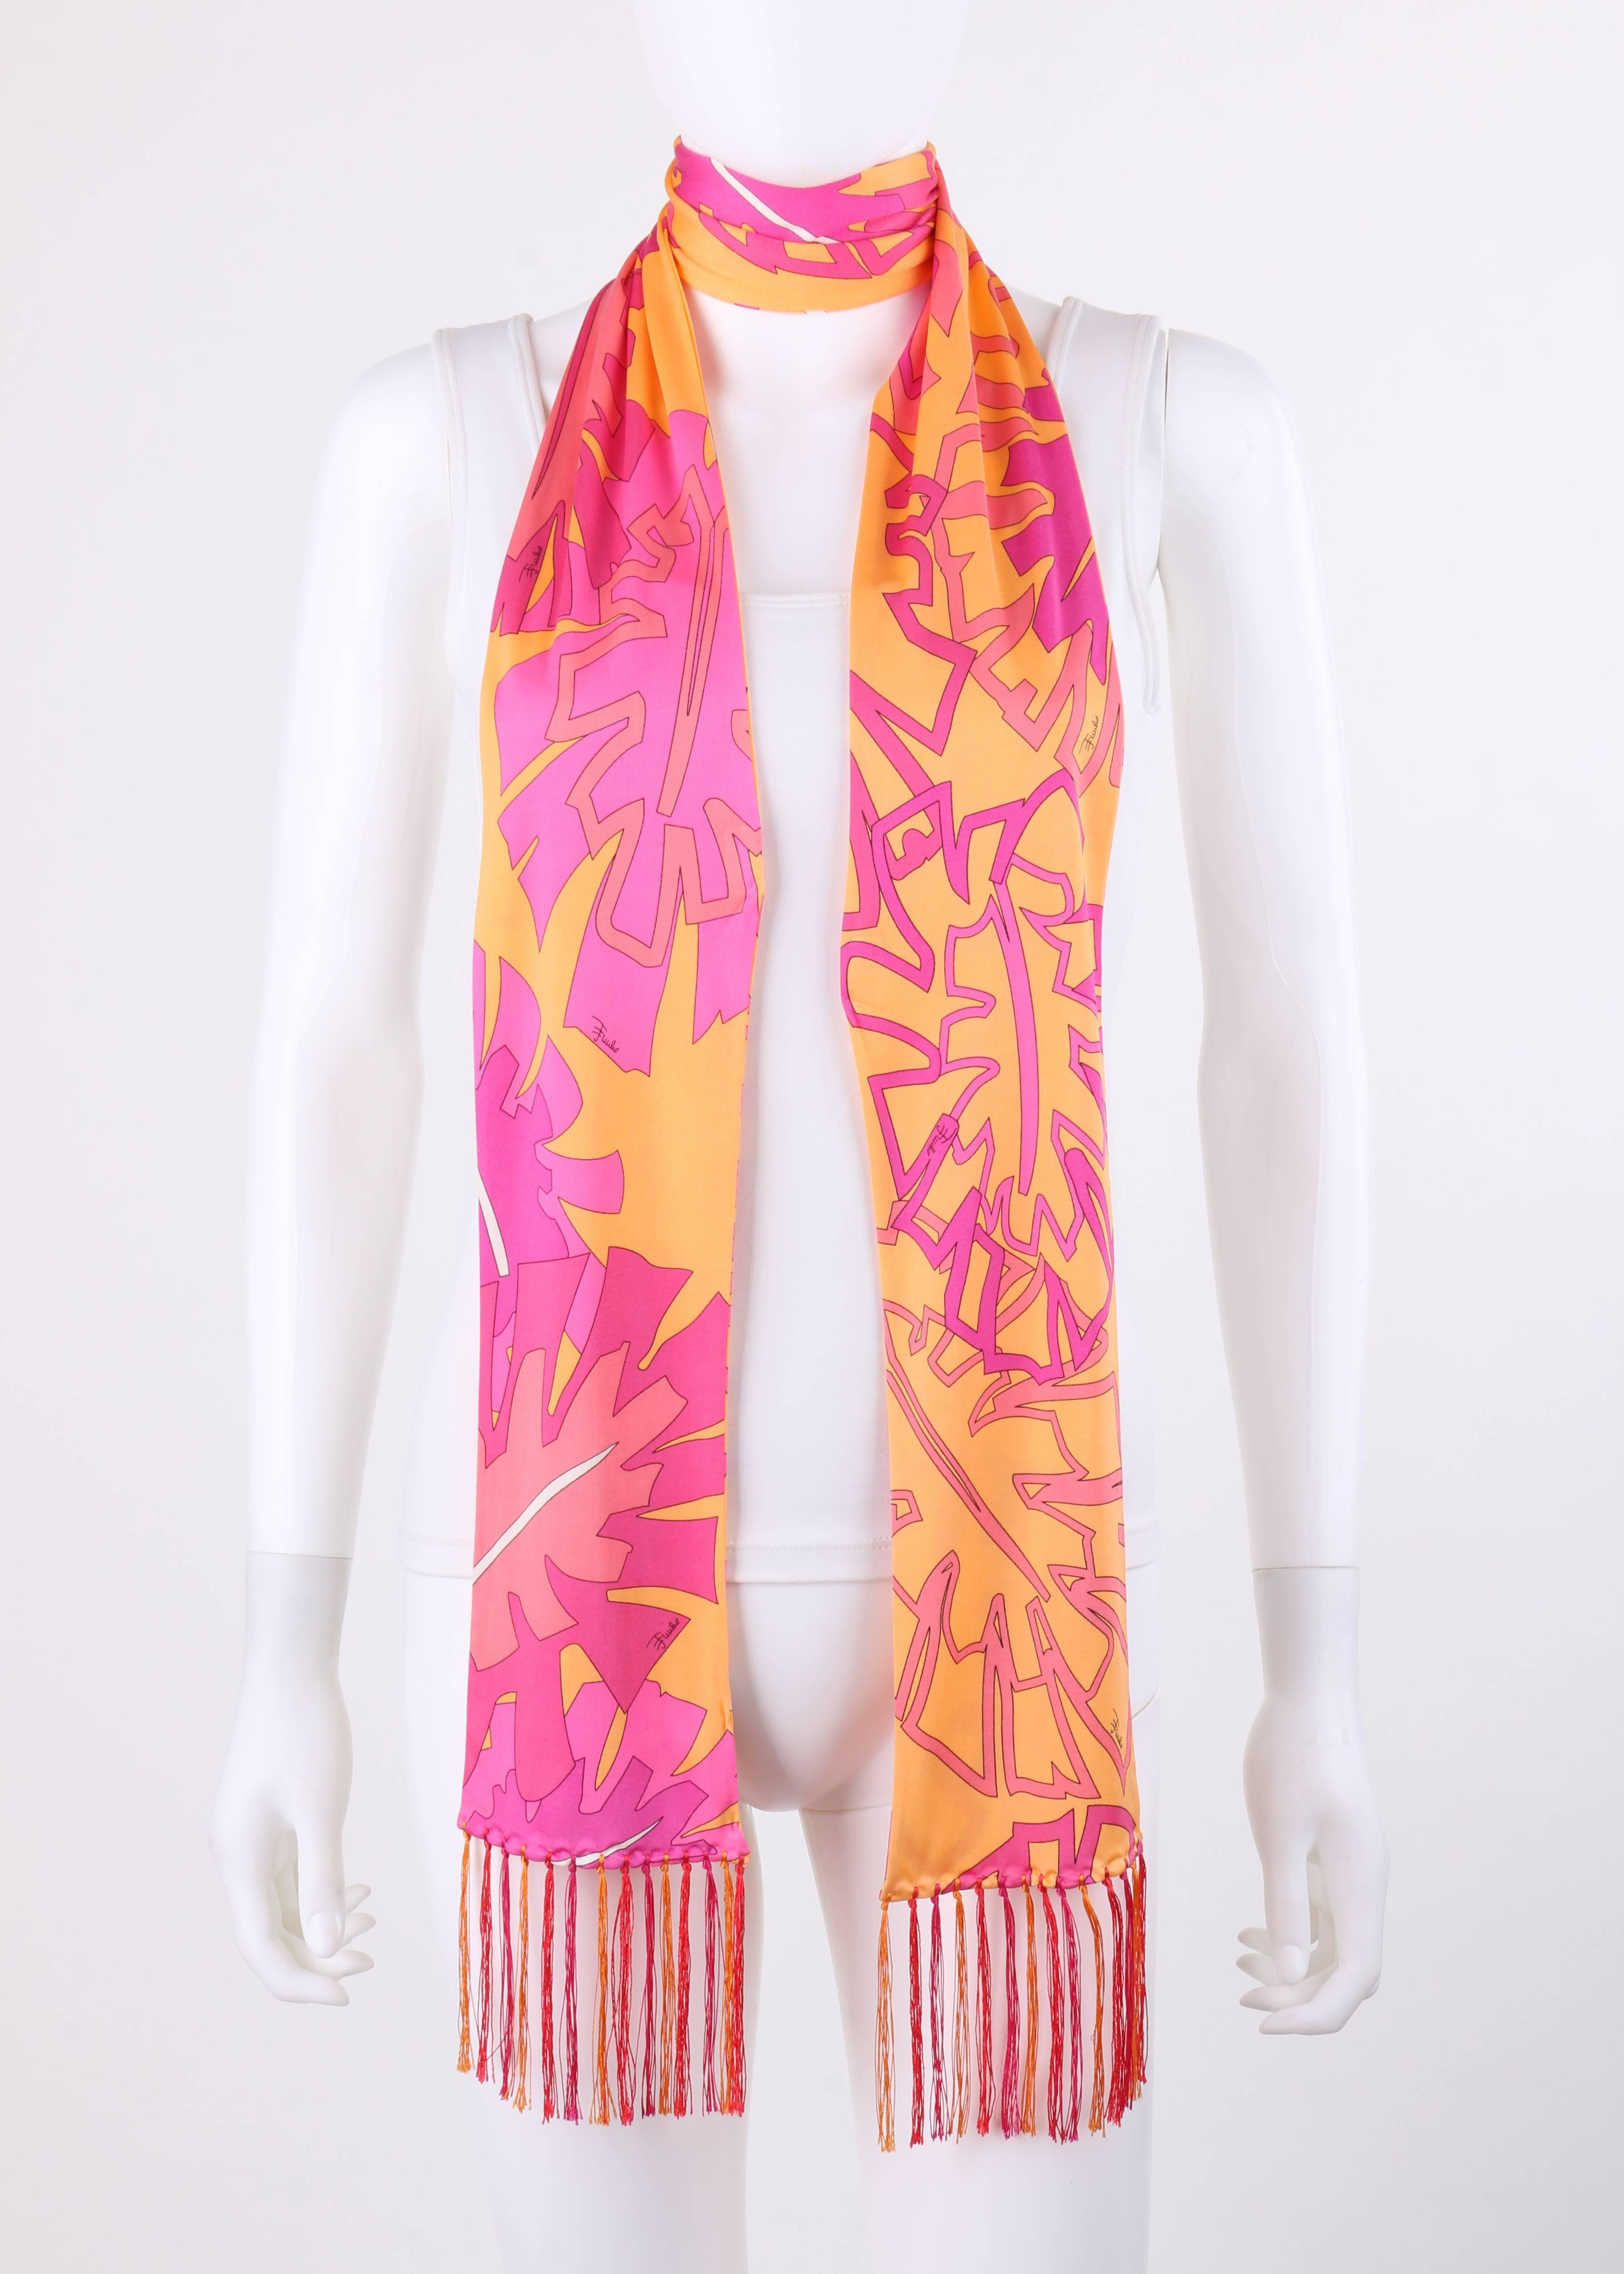 Emilio Pucci orange and pink signature leaf print silk jersey oblong fringe scarf. Multi-color signature botanical leaf print in shades of fuchsia, magenta, pink, and white on orange. Thin oblong style. Fringe detail at both ends in shades of